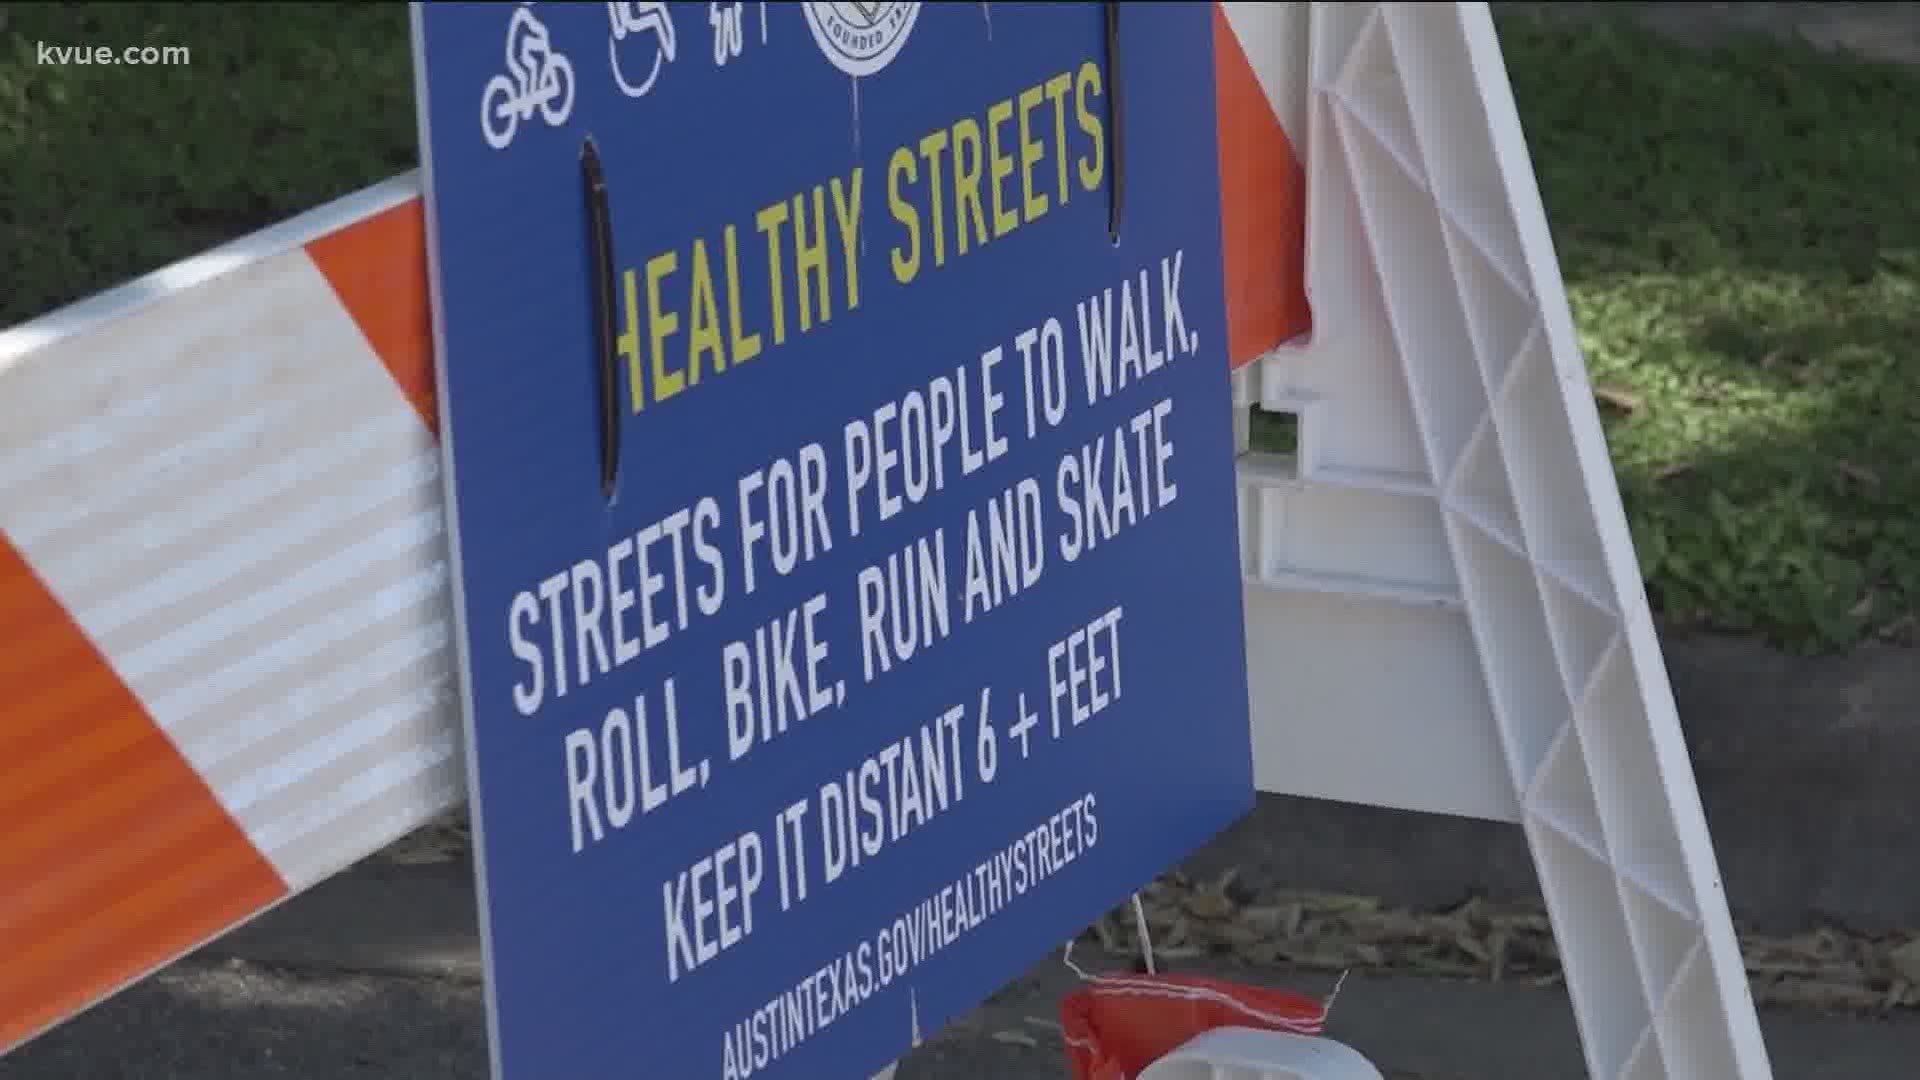 Healthy Streets is part of a city plan to provide more outdoor space for physical distancing during the pandemic.